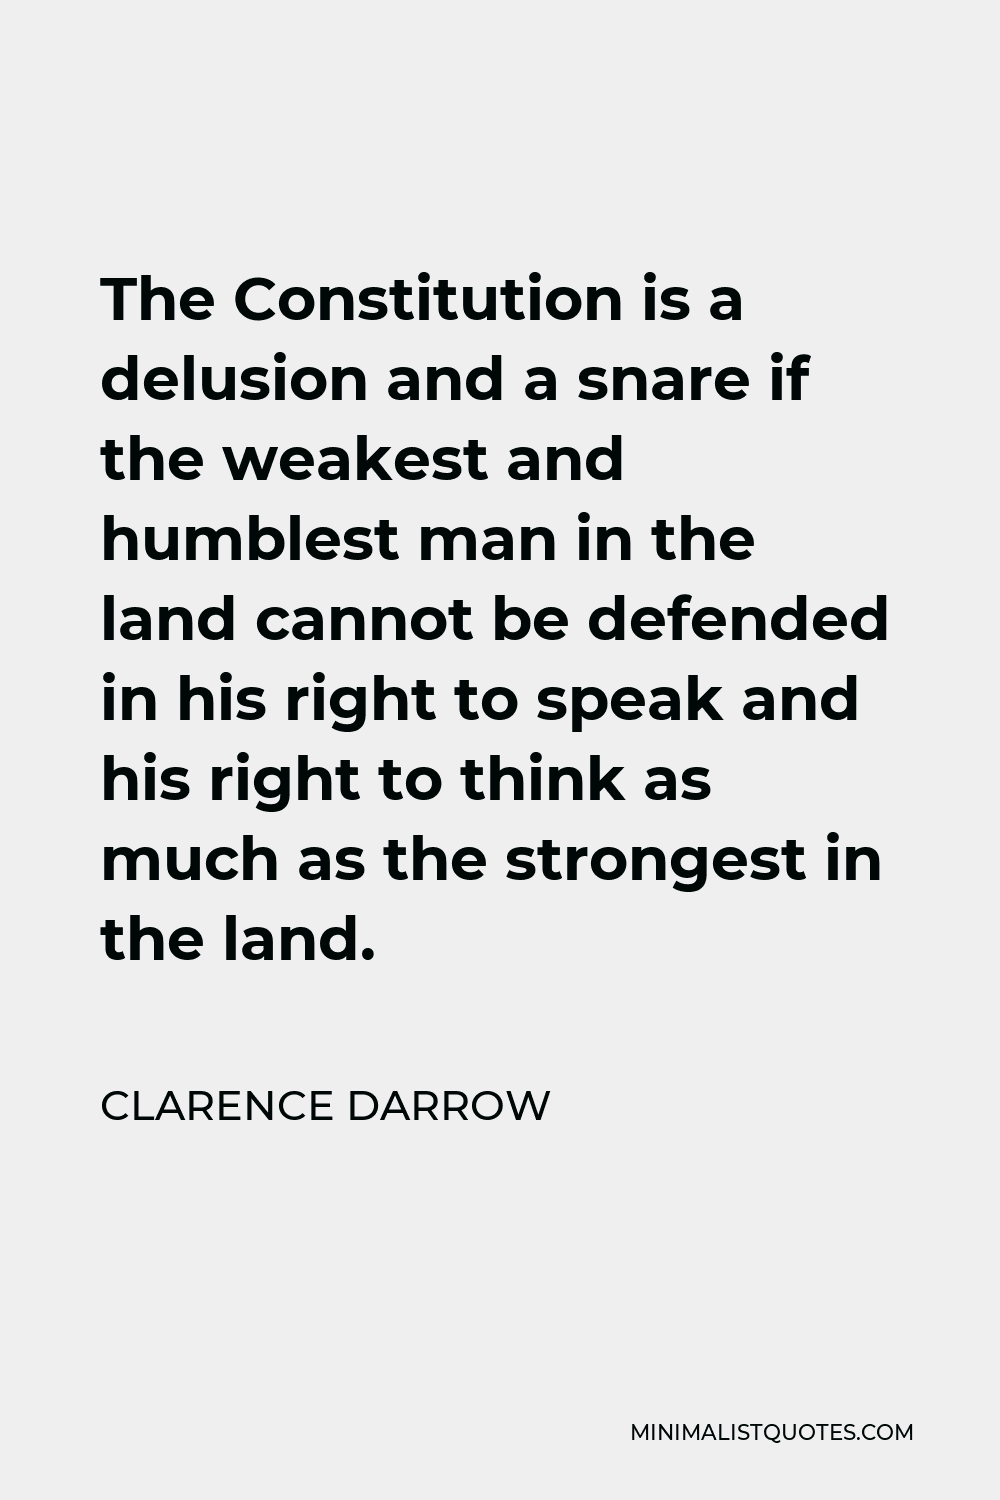 Clarence Darrow Quote - The Constitution is a delusion and a snare if the weakest and humblest man in the land cannot be defended in his right to speak and his right to think as much as the strongest in the land.